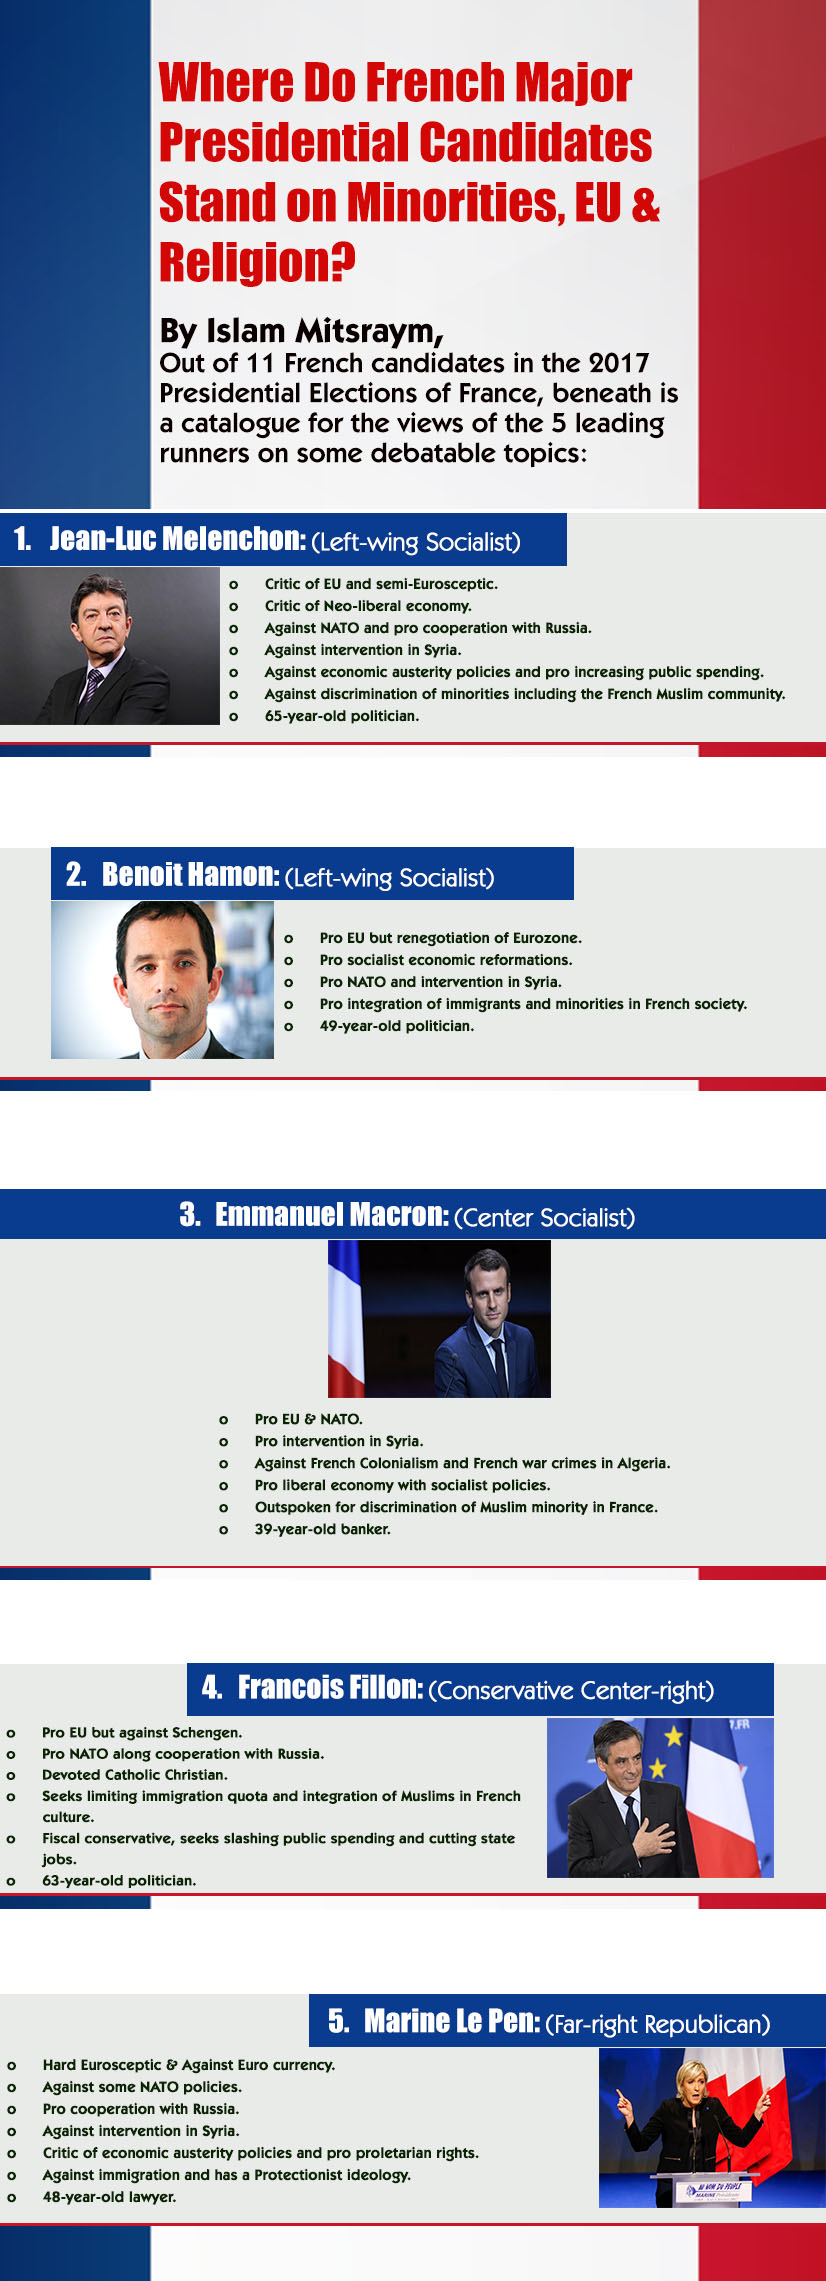 Where Do French Candidates Stand on Minorities, EU & Religion?